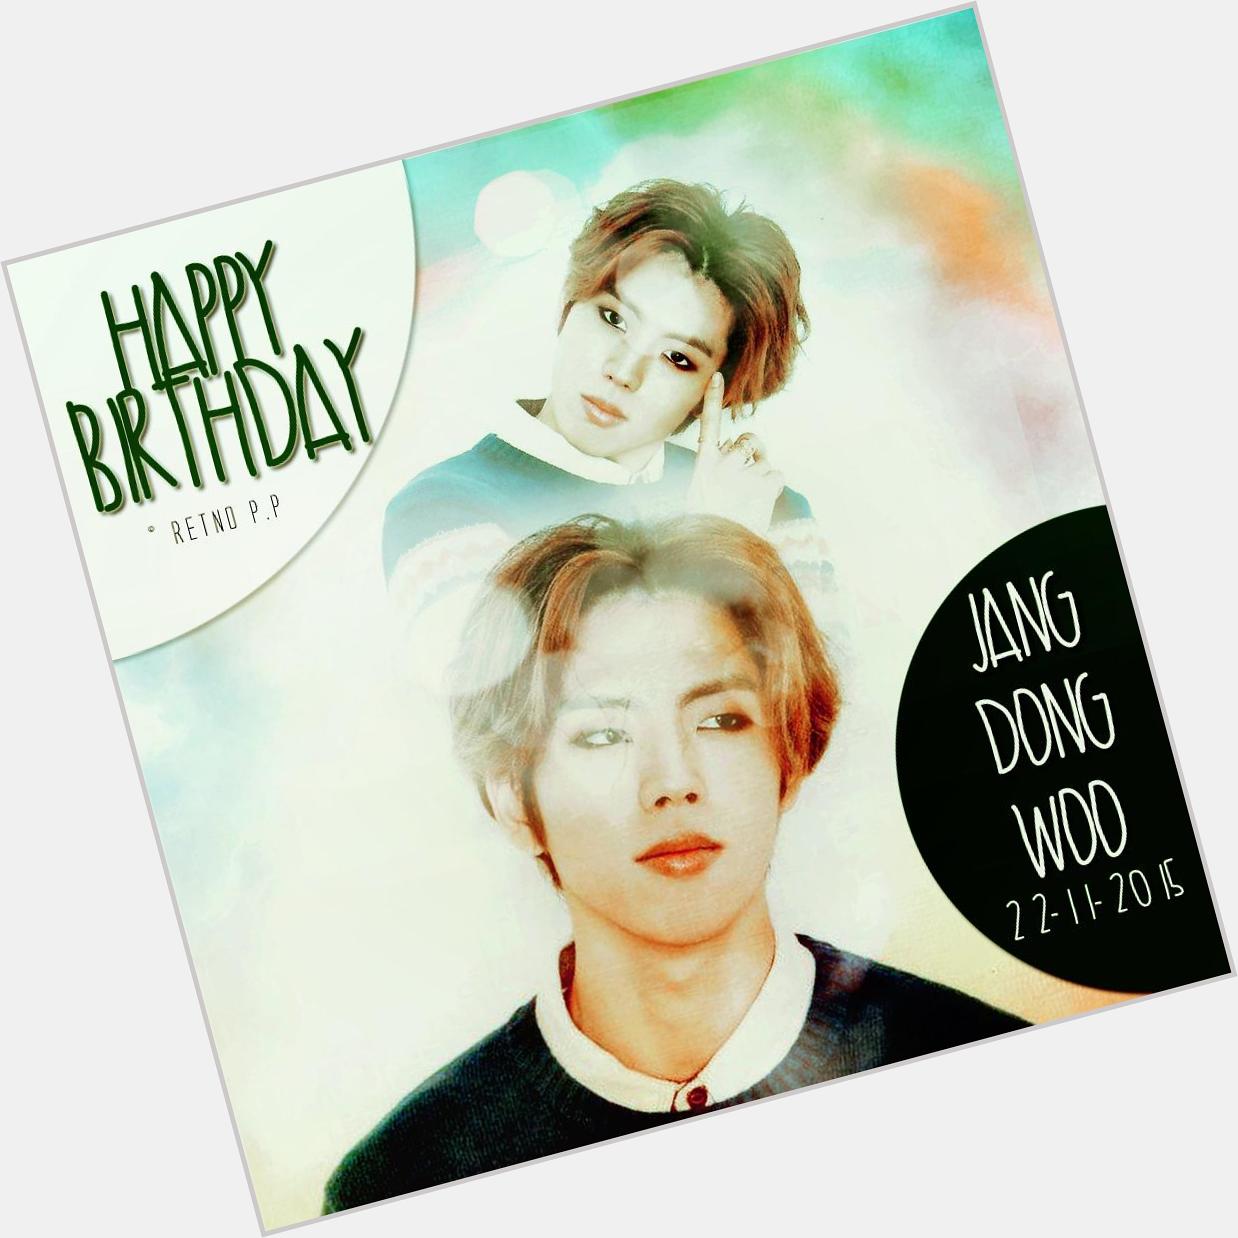 Happy birthday to our Jang Dong Woo   Wish you all the best  